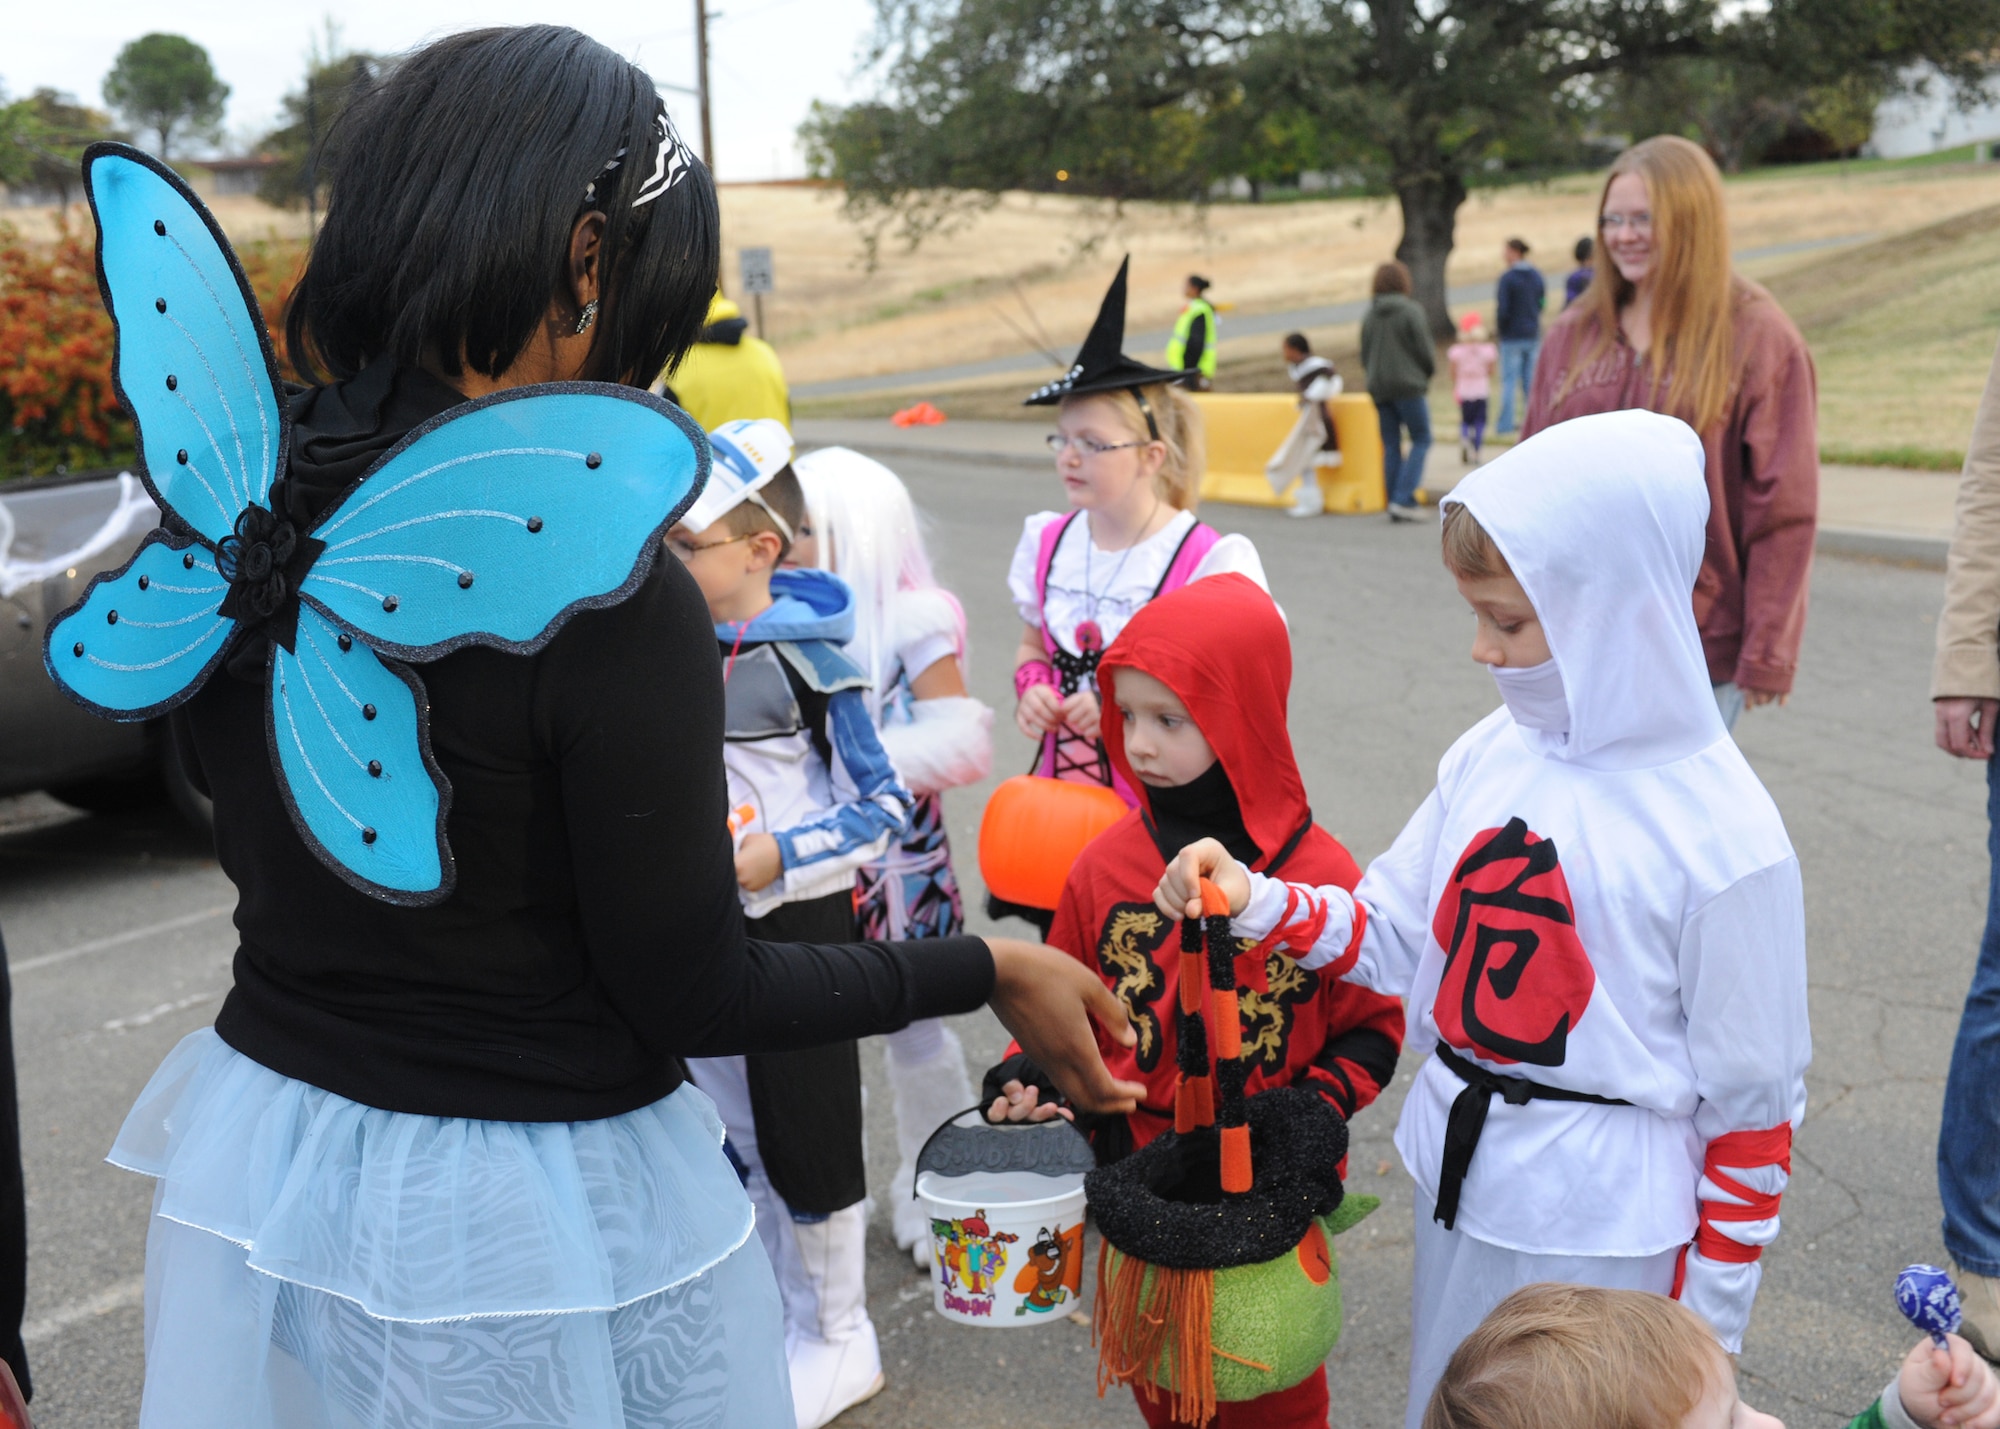 Team Beale hosts its annual Halloween Trunk or Treat at Ryden Park, Beale Air Force Base Calif., Oct. 31, 2012. Approximately 100 families participated in the event. (U.S. Air Force photo by 2nd Lt. Siobhan Bennett)